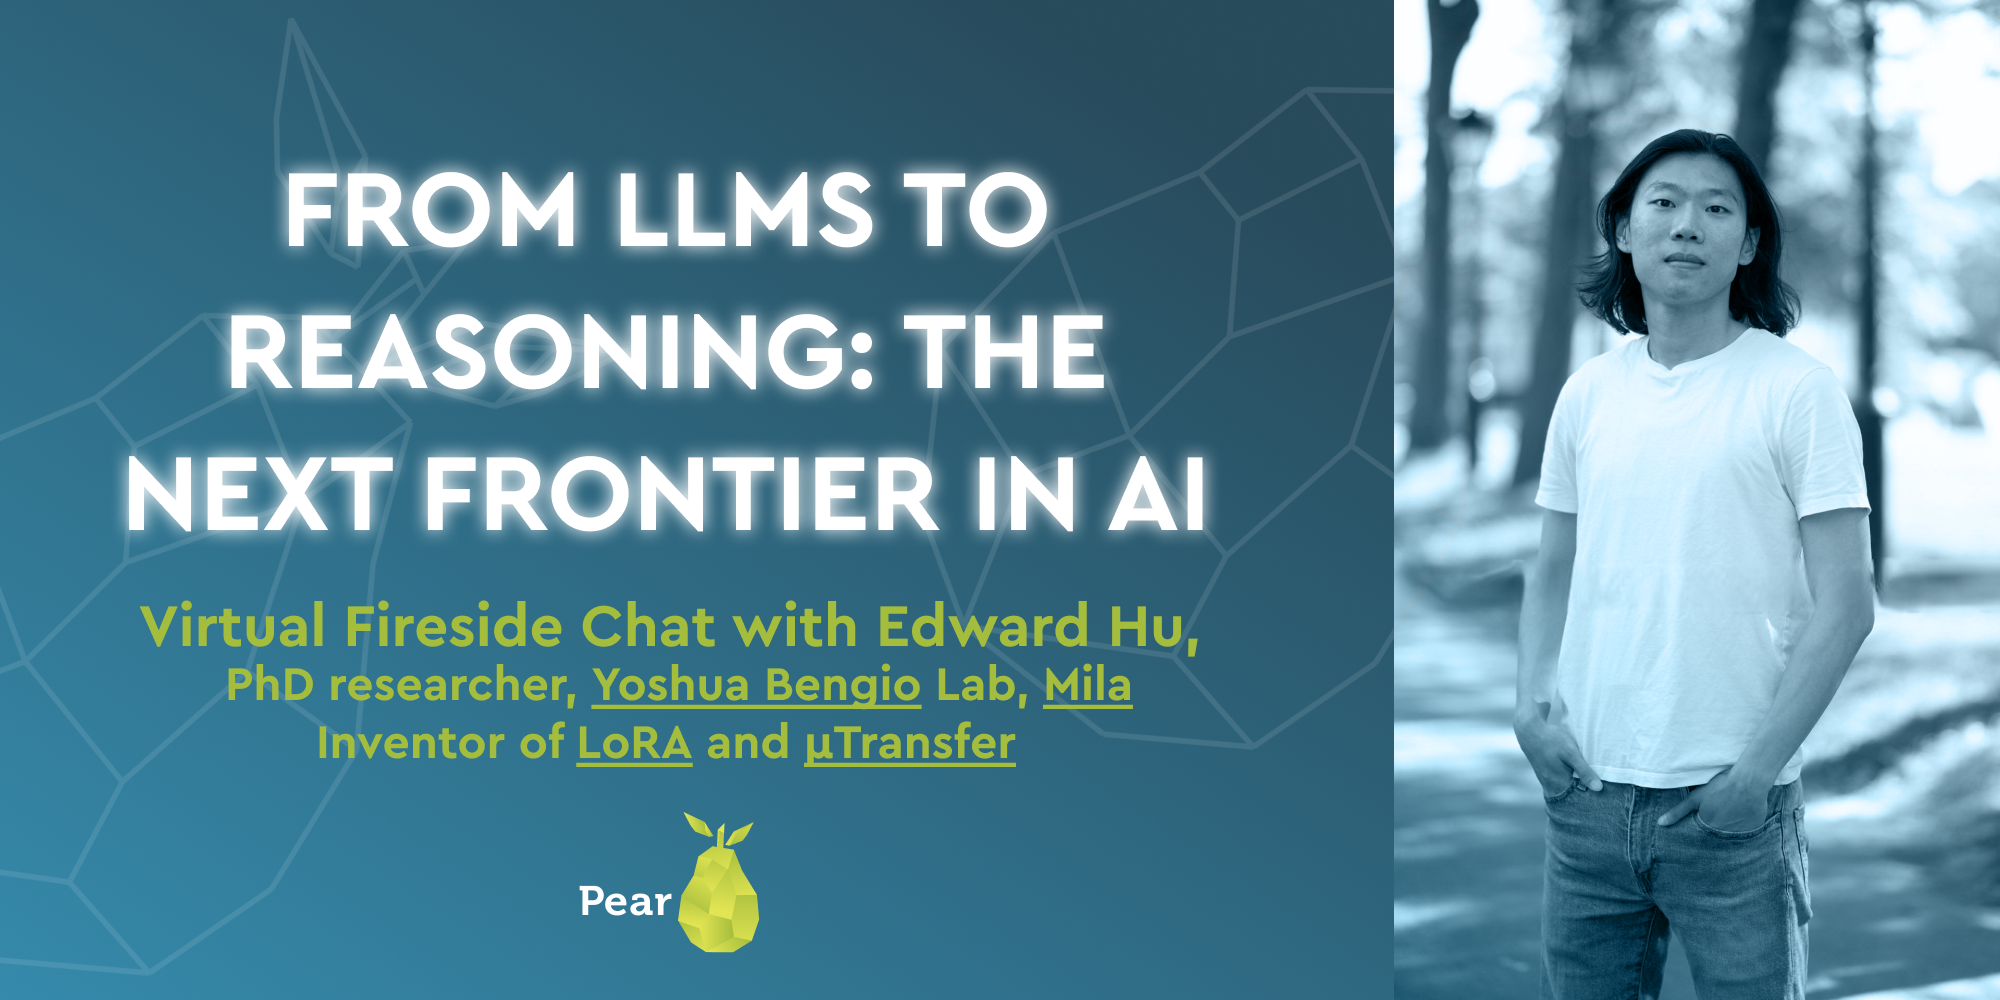 resources From LLMs to Reasoning: The Next Frontier in AI with Edward Hu